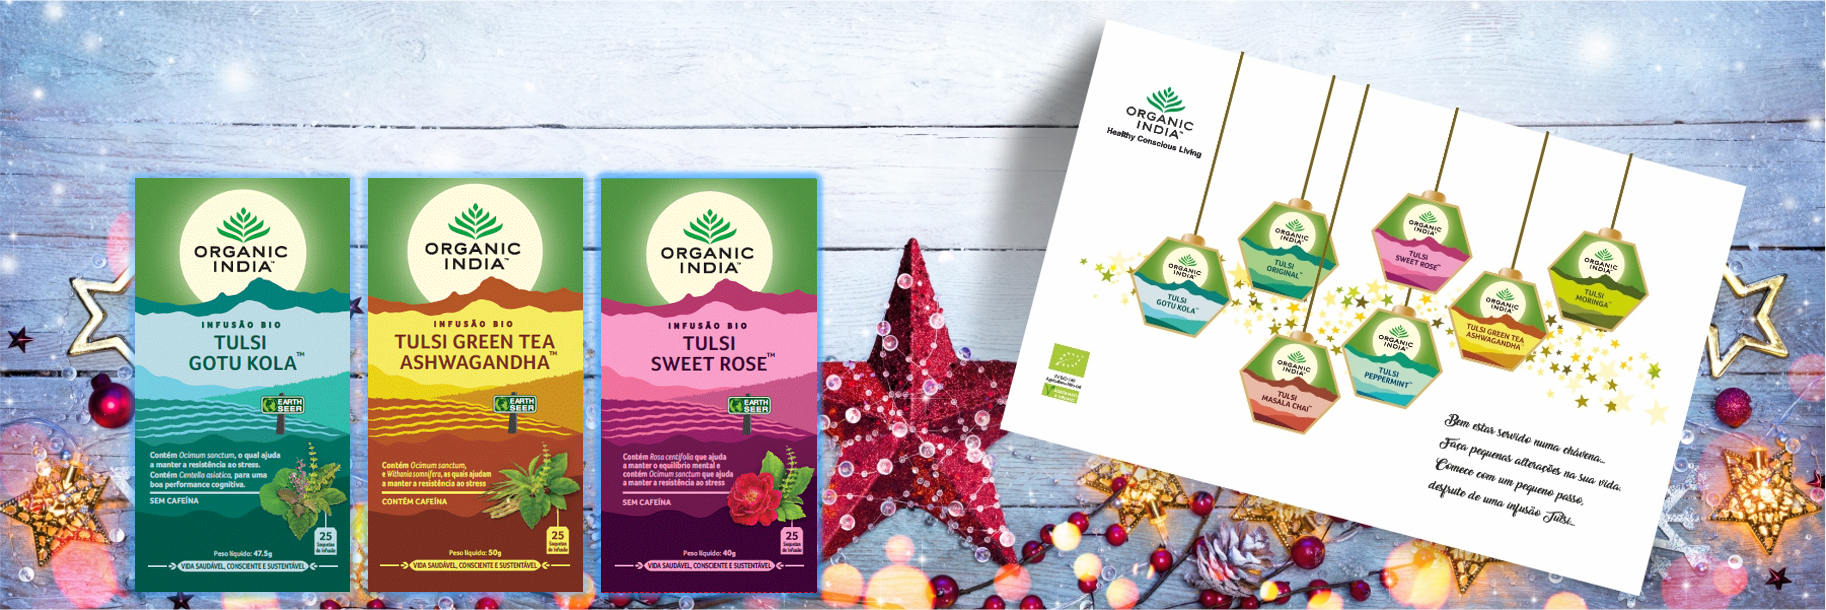 Pack Natal 21 Trio Relax Infusoes Organic India™